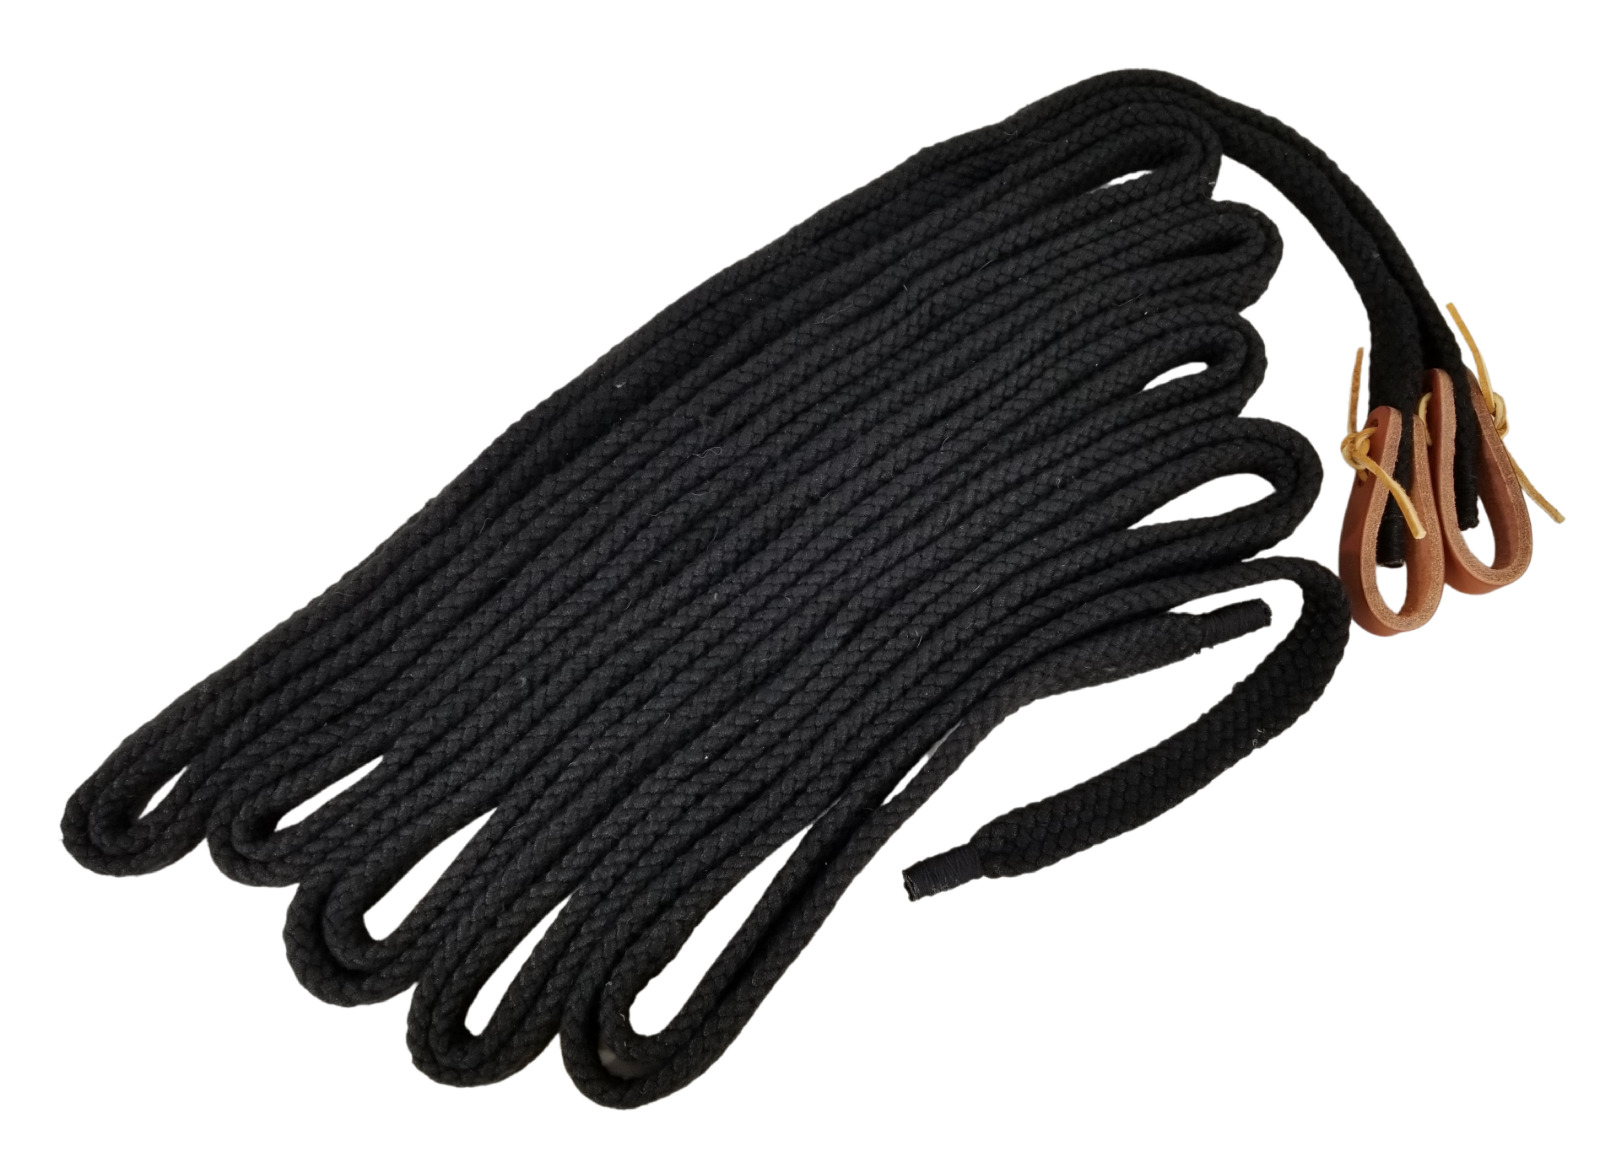 D.a. Brand 14' Black Flat Braided Cotton Pony Driving Lines Horse Tack Equine